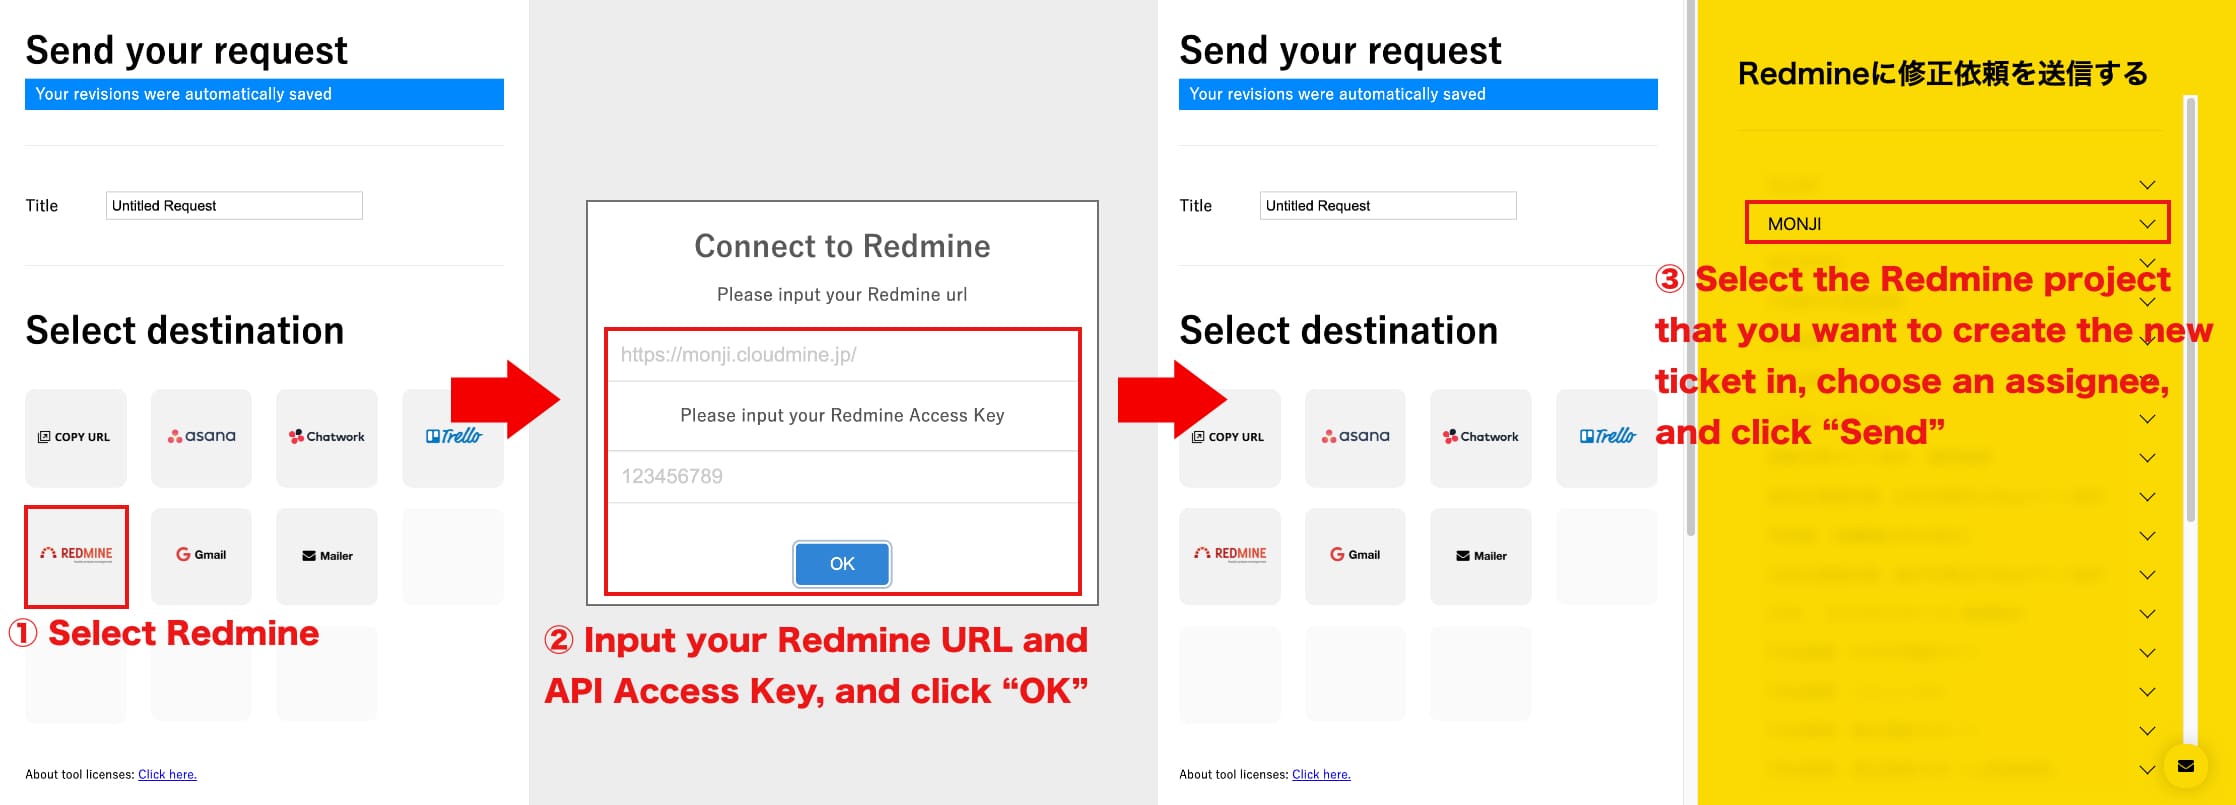 MONJI will soon be compatible with Redmine